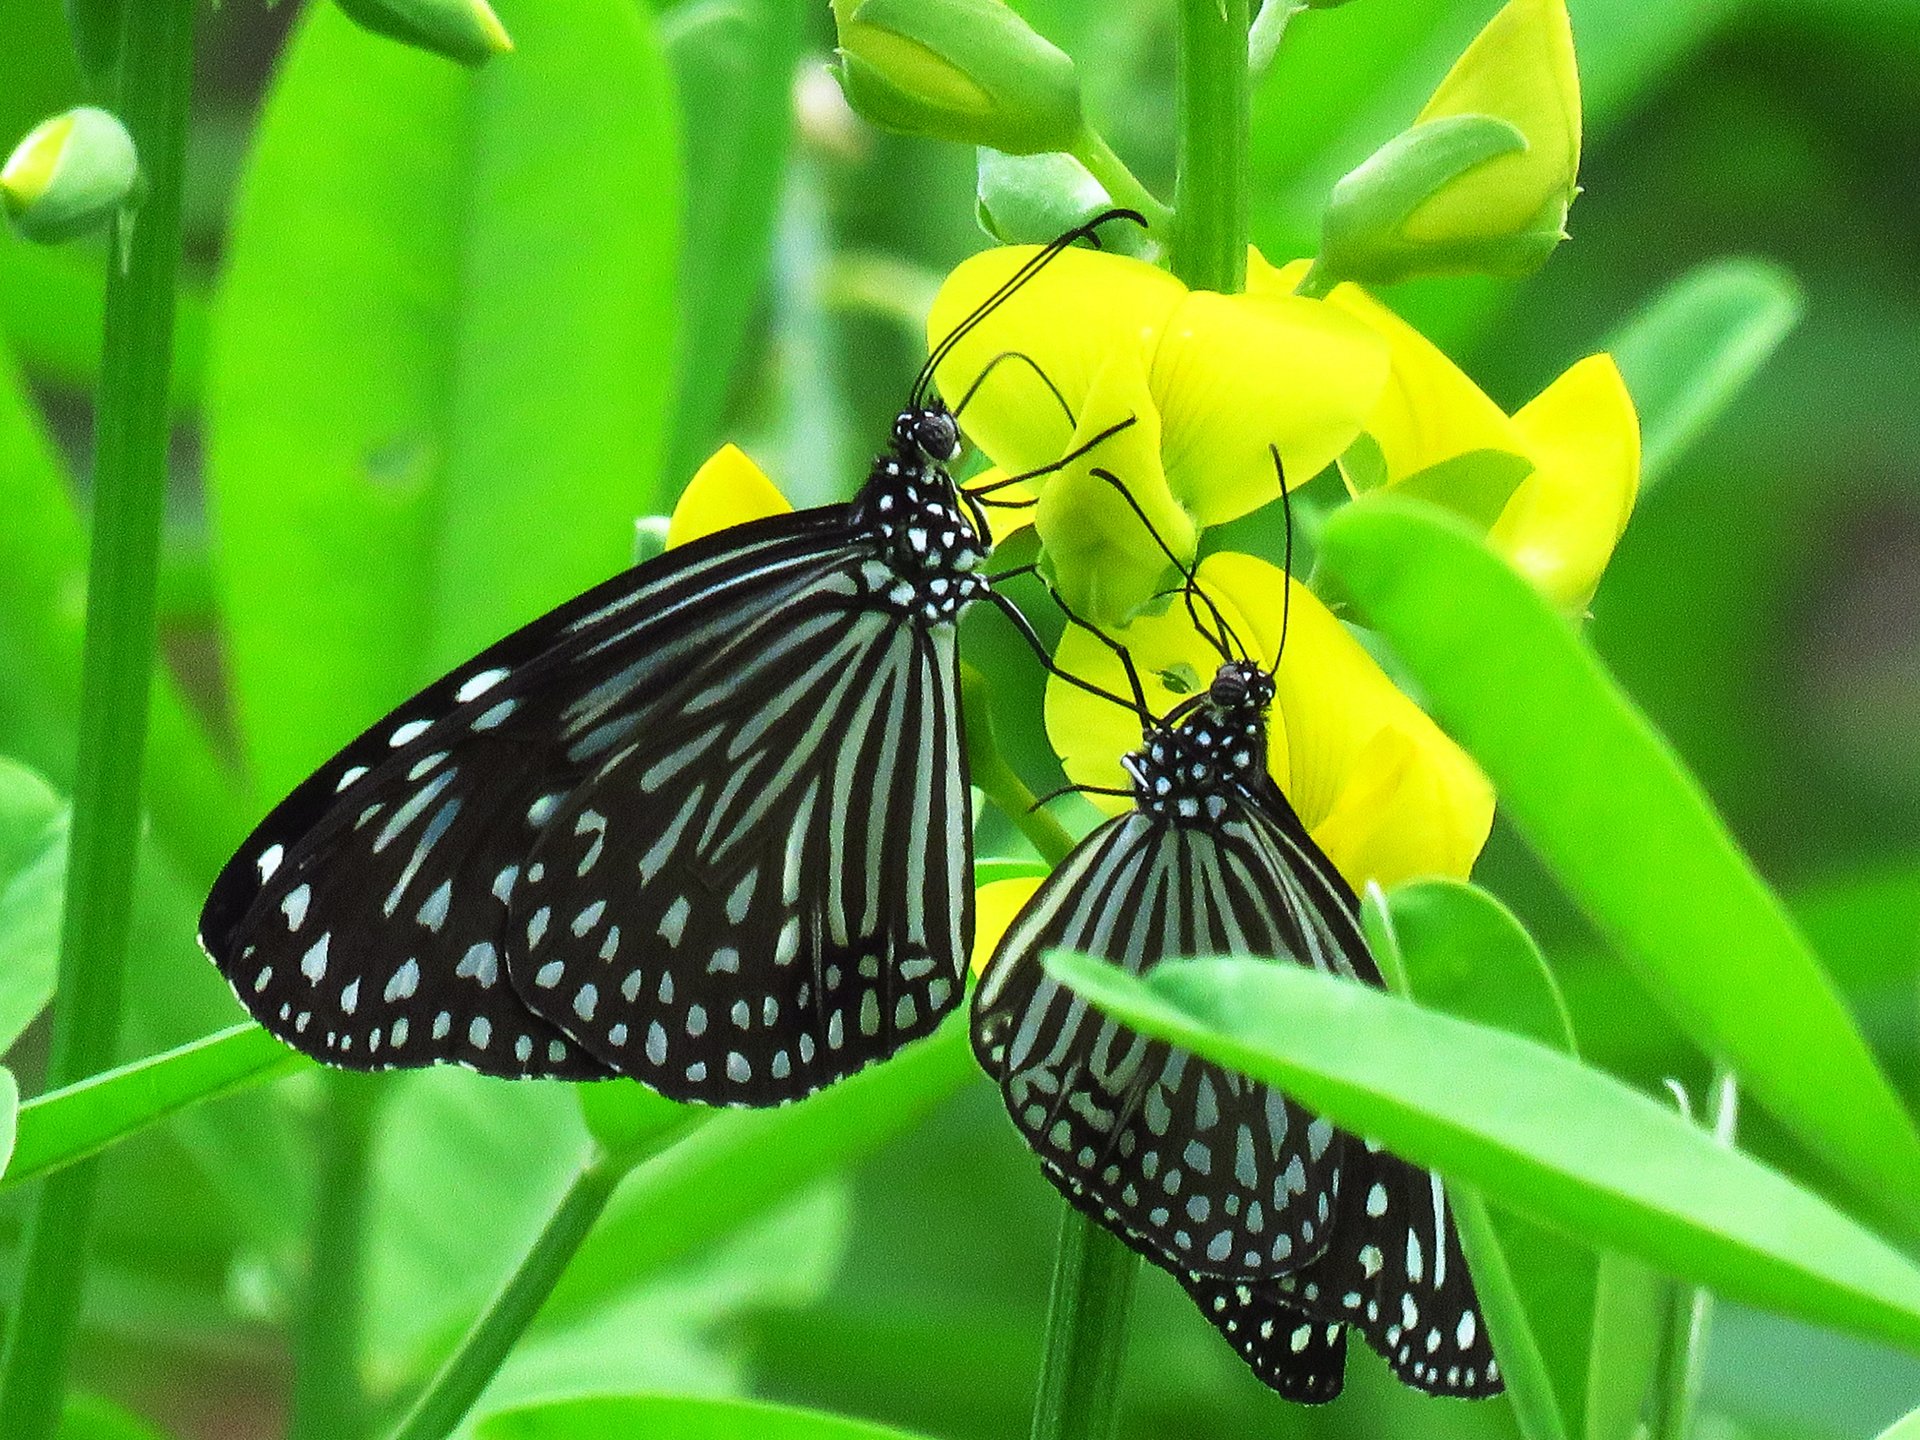 Black and White Butterflies